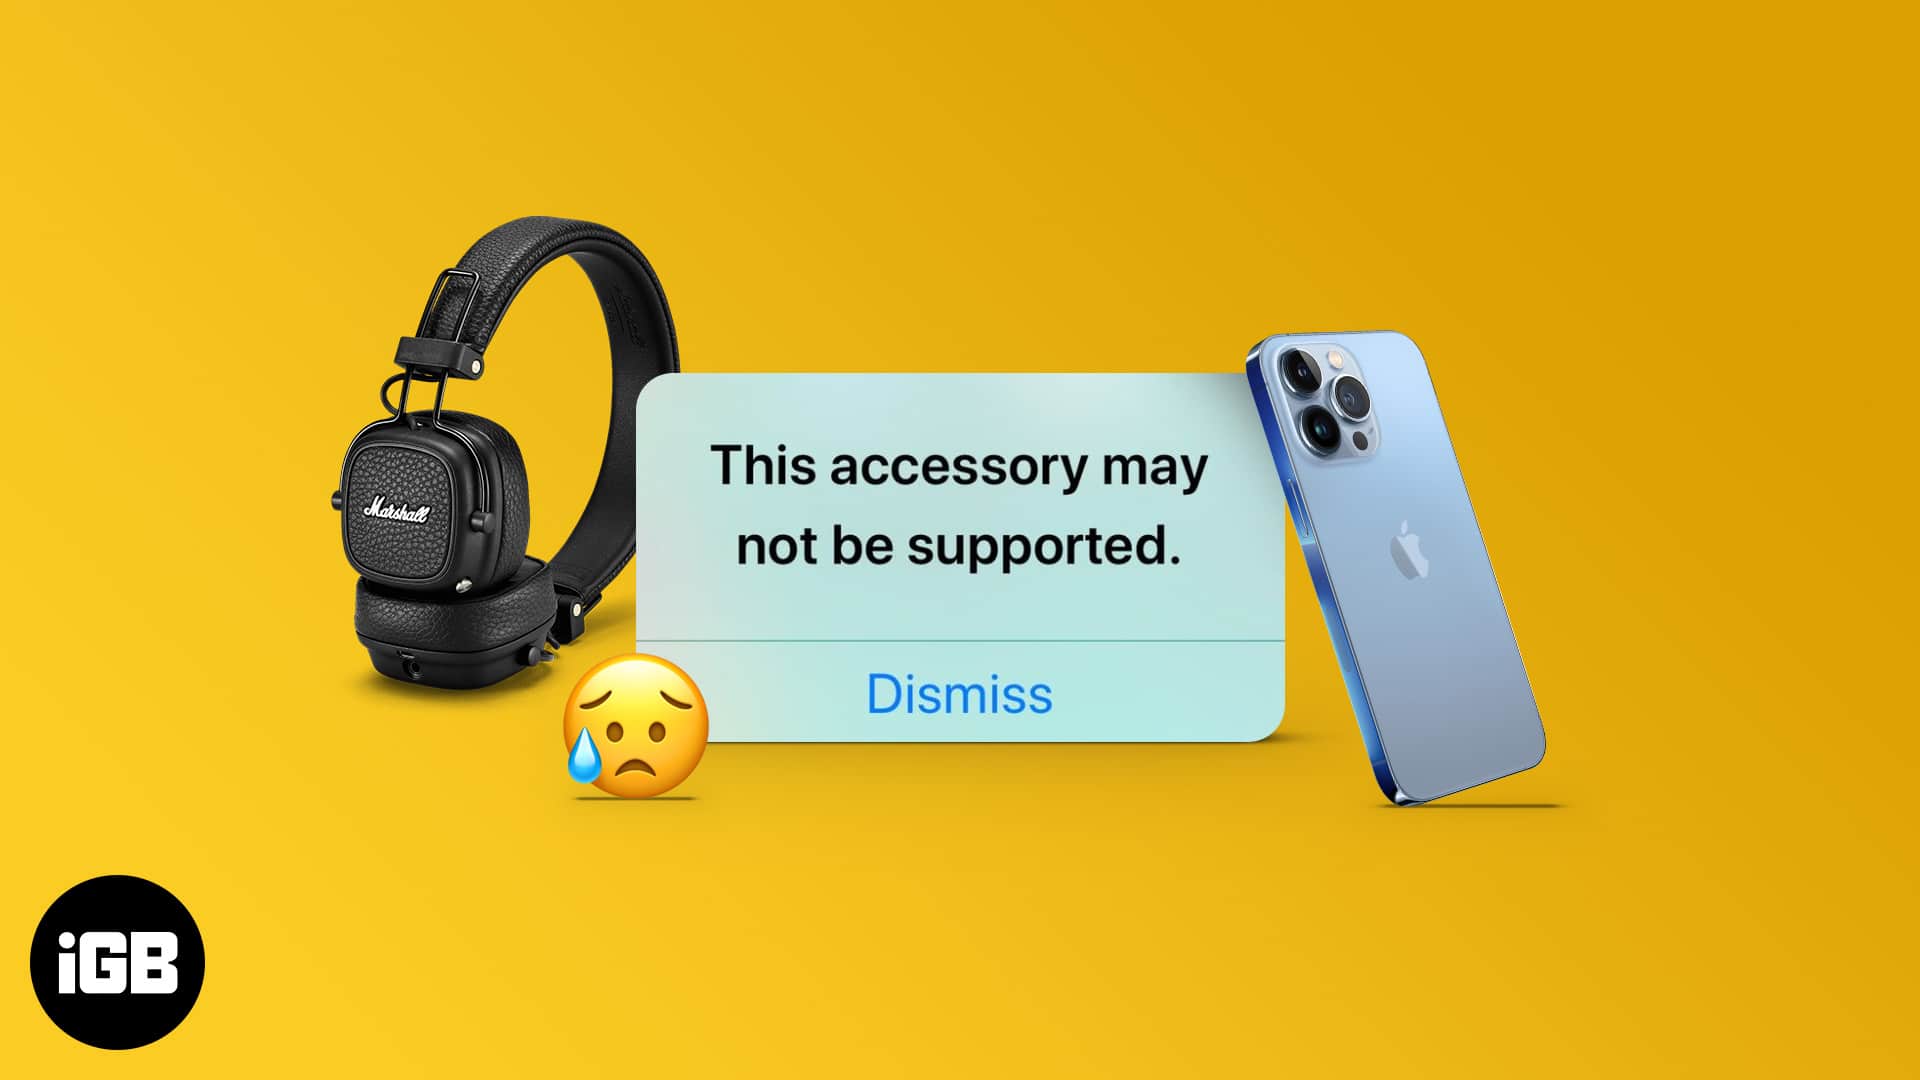 How to fix this accessory may not be supported on iphone and ipad